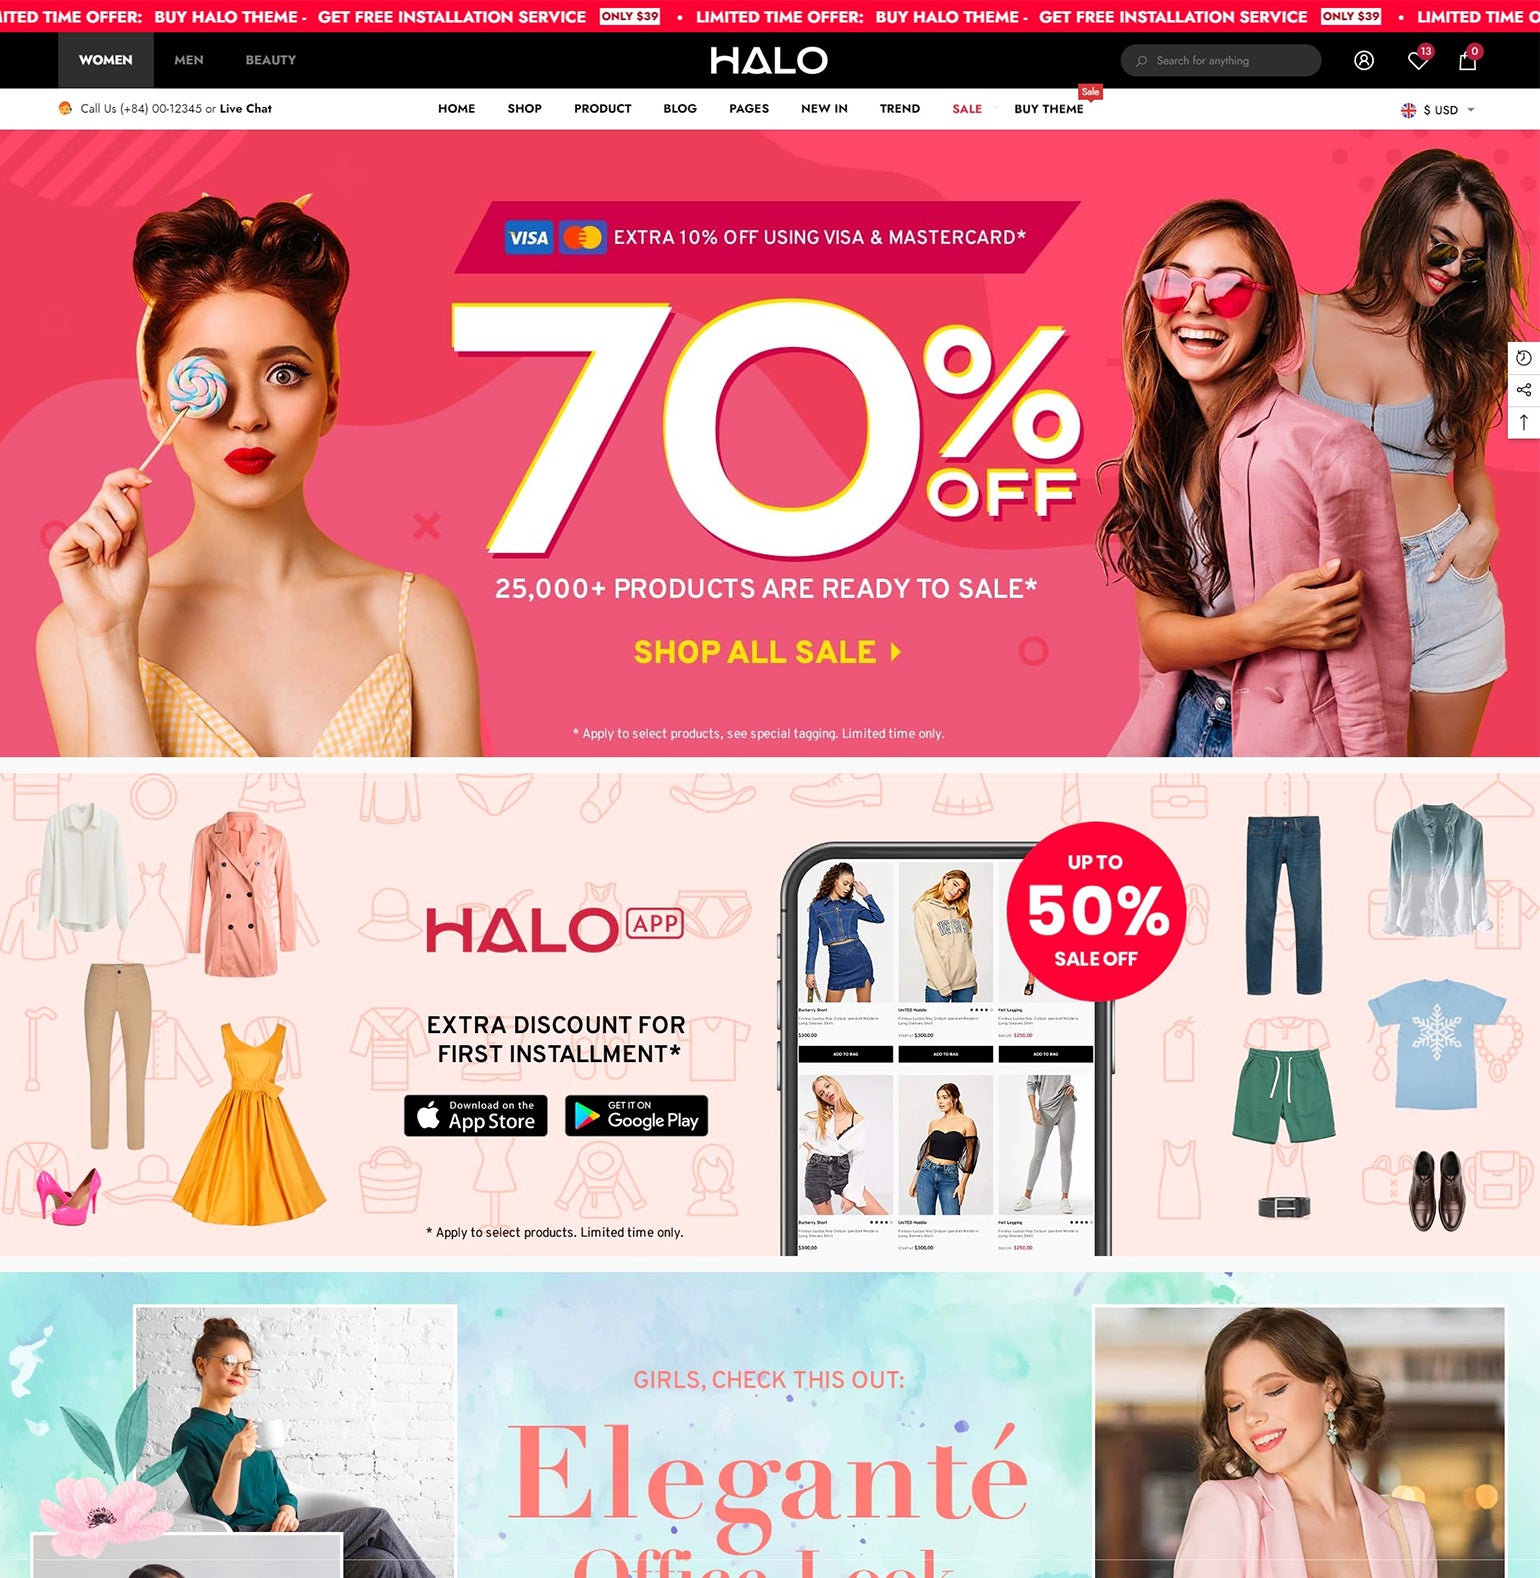 Halo Theme - Fashion and Apparel Ecommerce Website Template